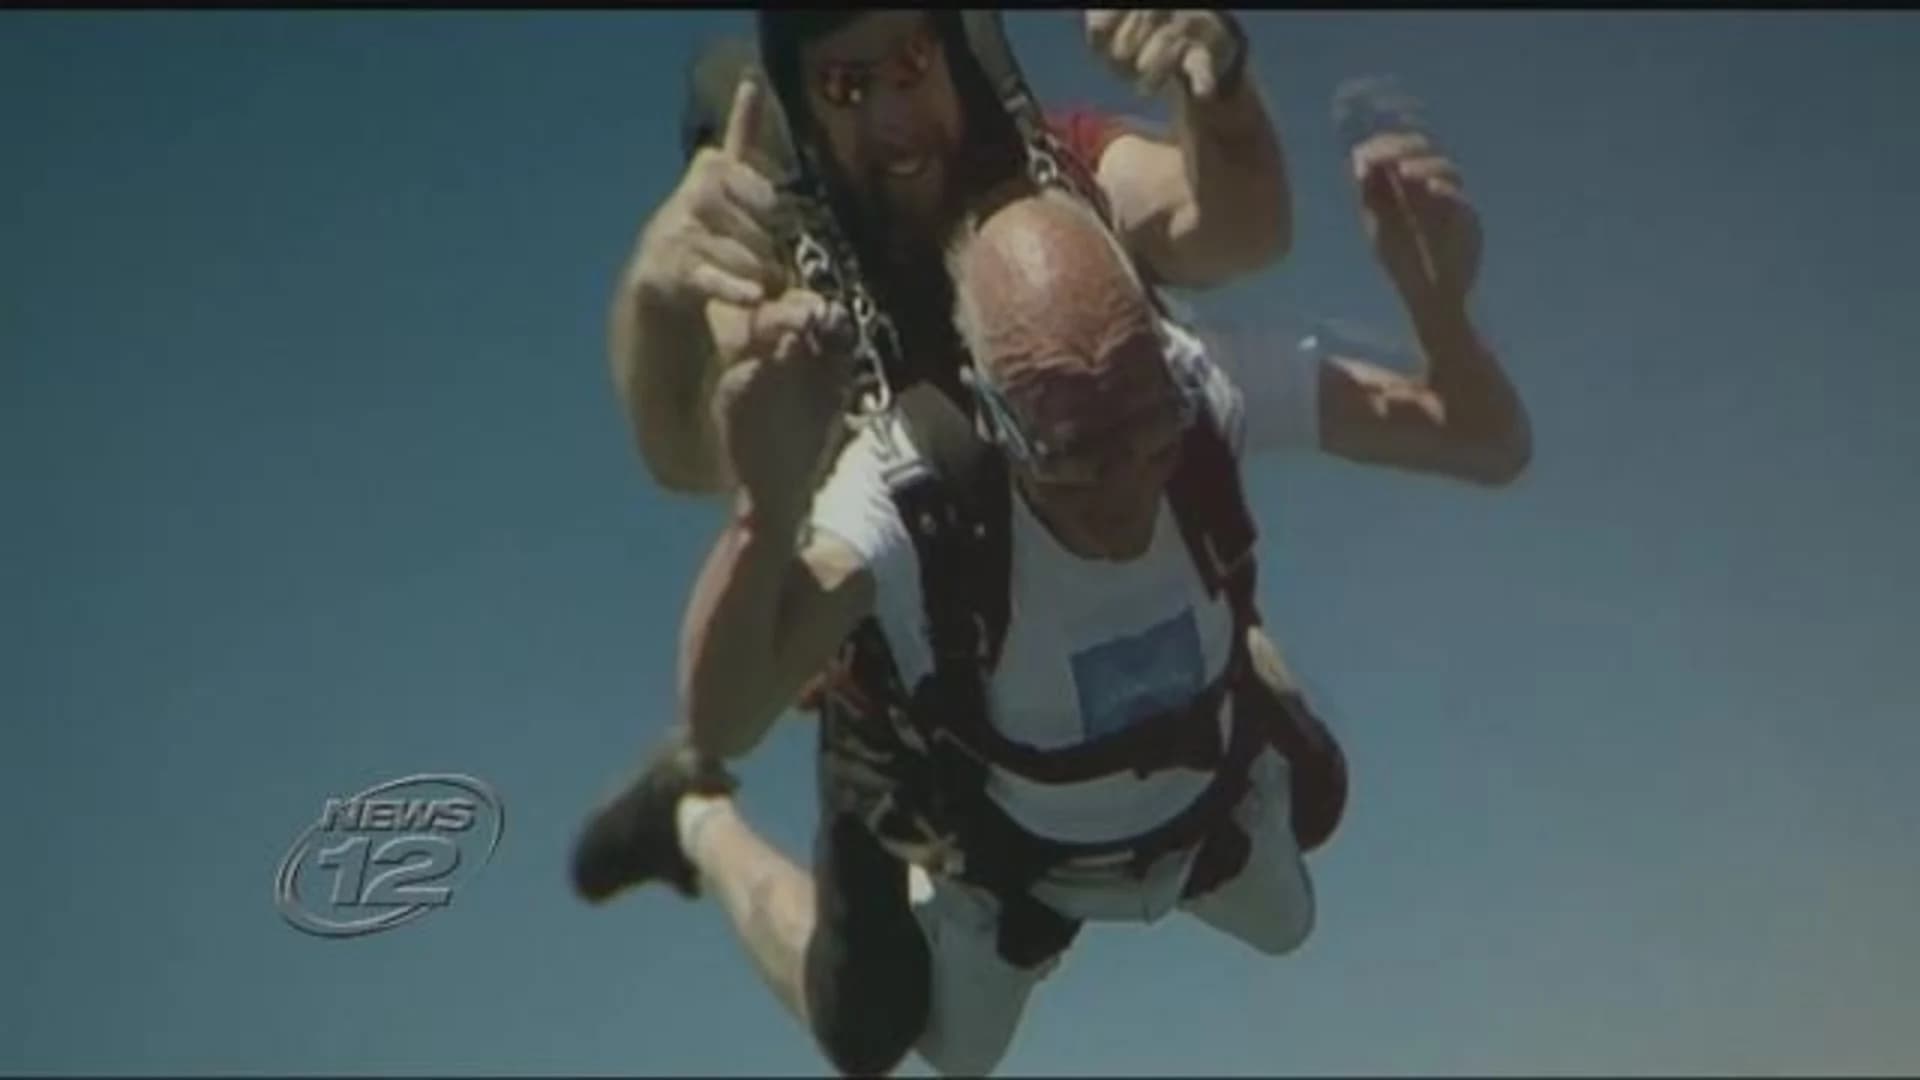 90-year-old goes skydiving on his birthday